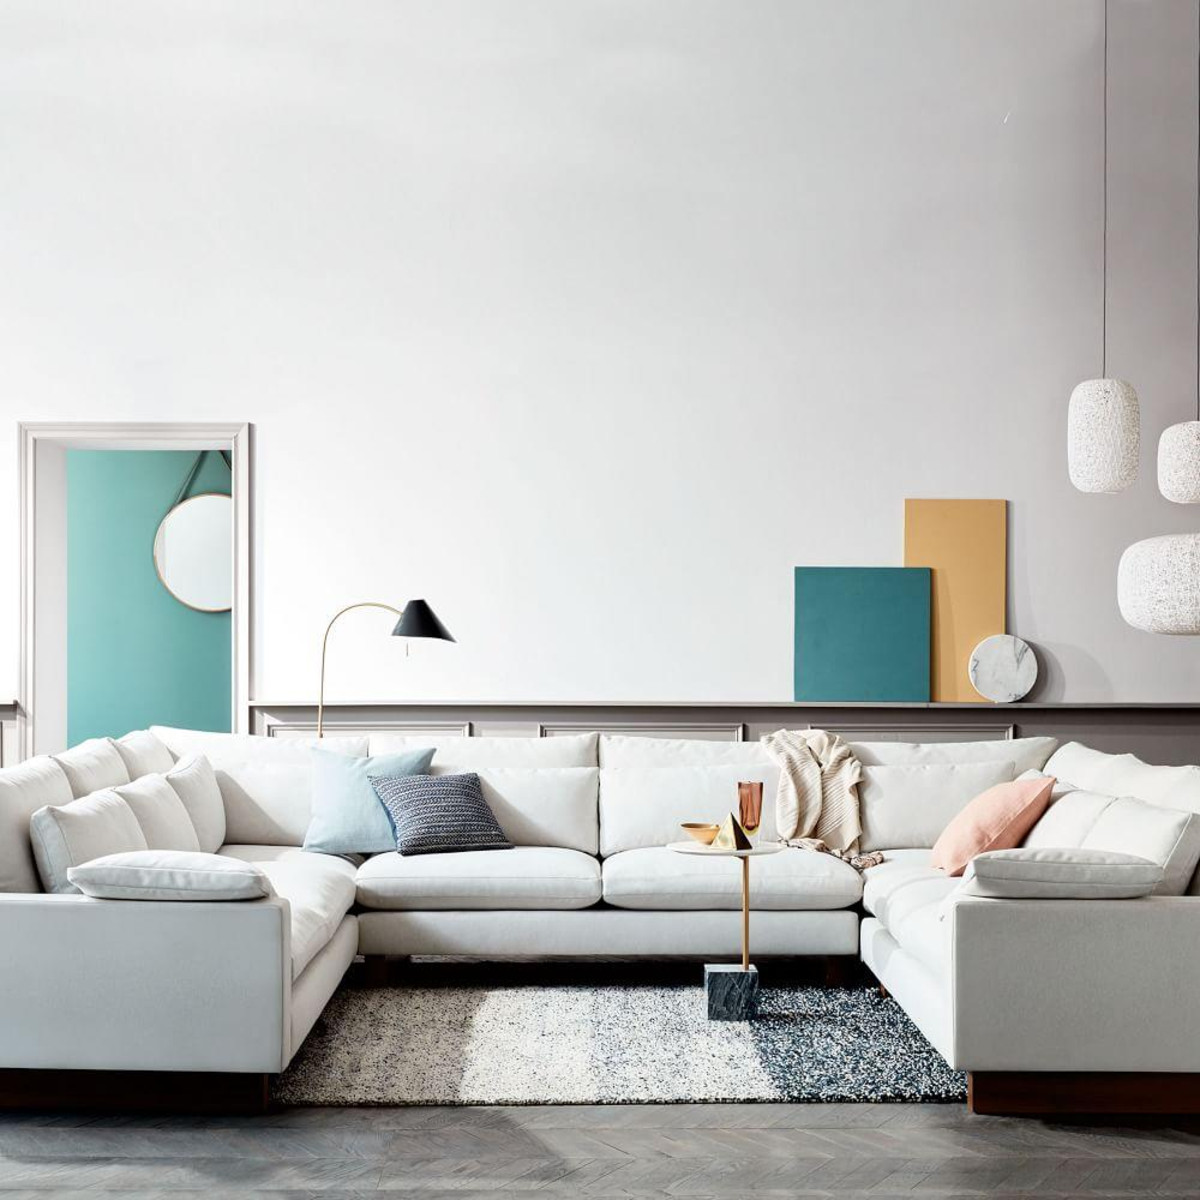 Oversized U-shaped couch from west elm